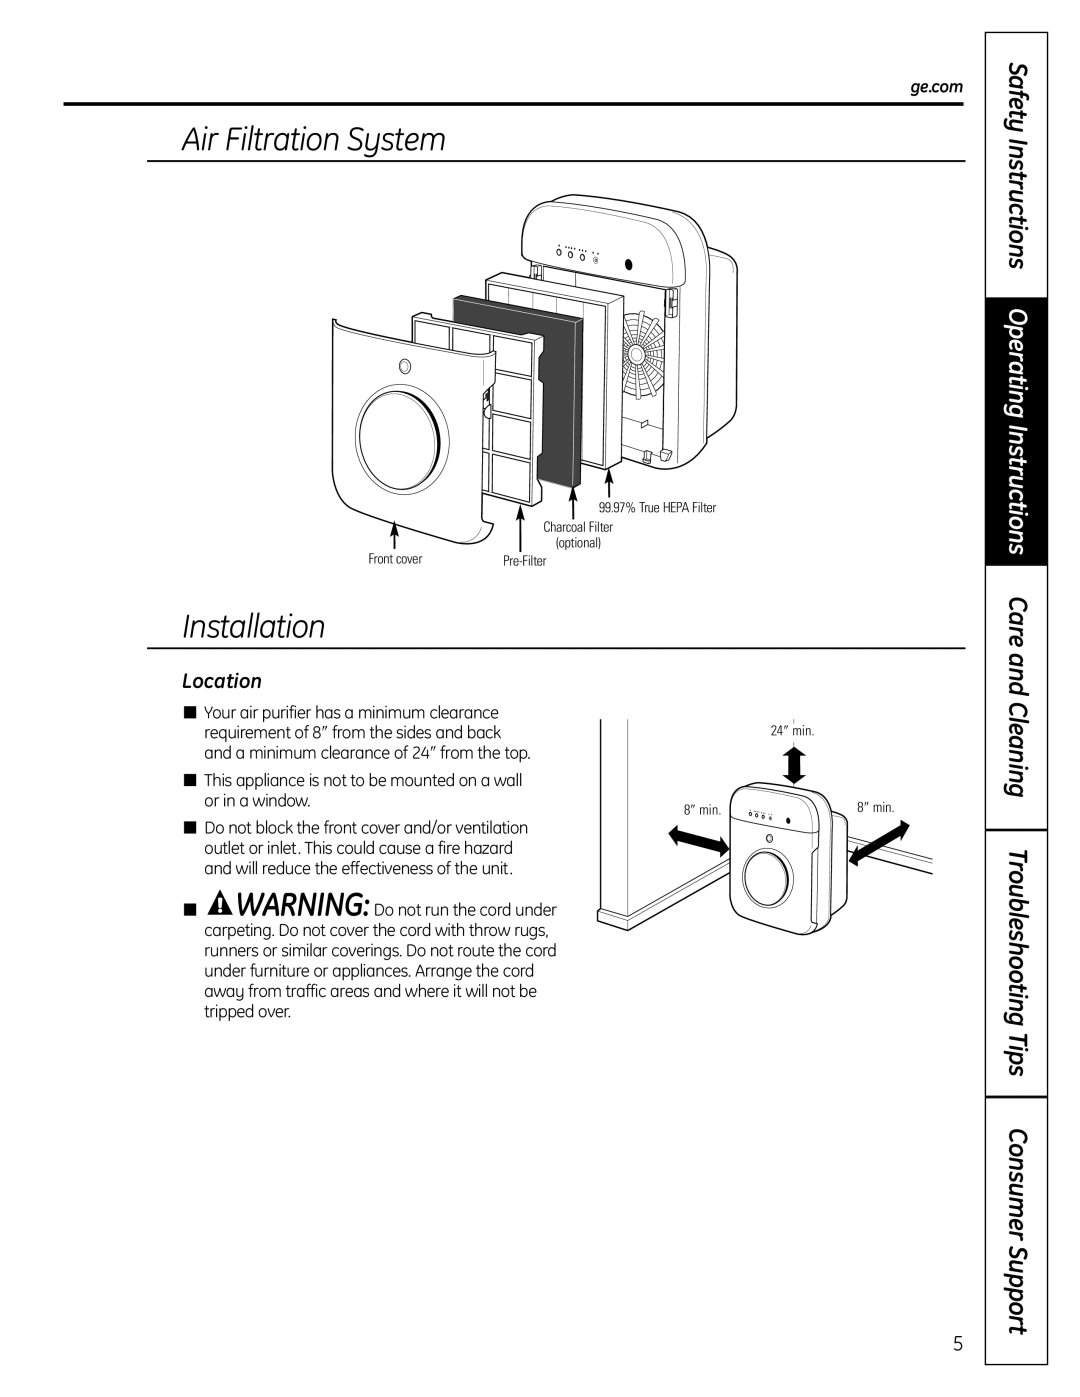 GE AFHC09AM owner manual Air Filtration System, Installation, Safety Instructions Operating Instructions Care, Location 